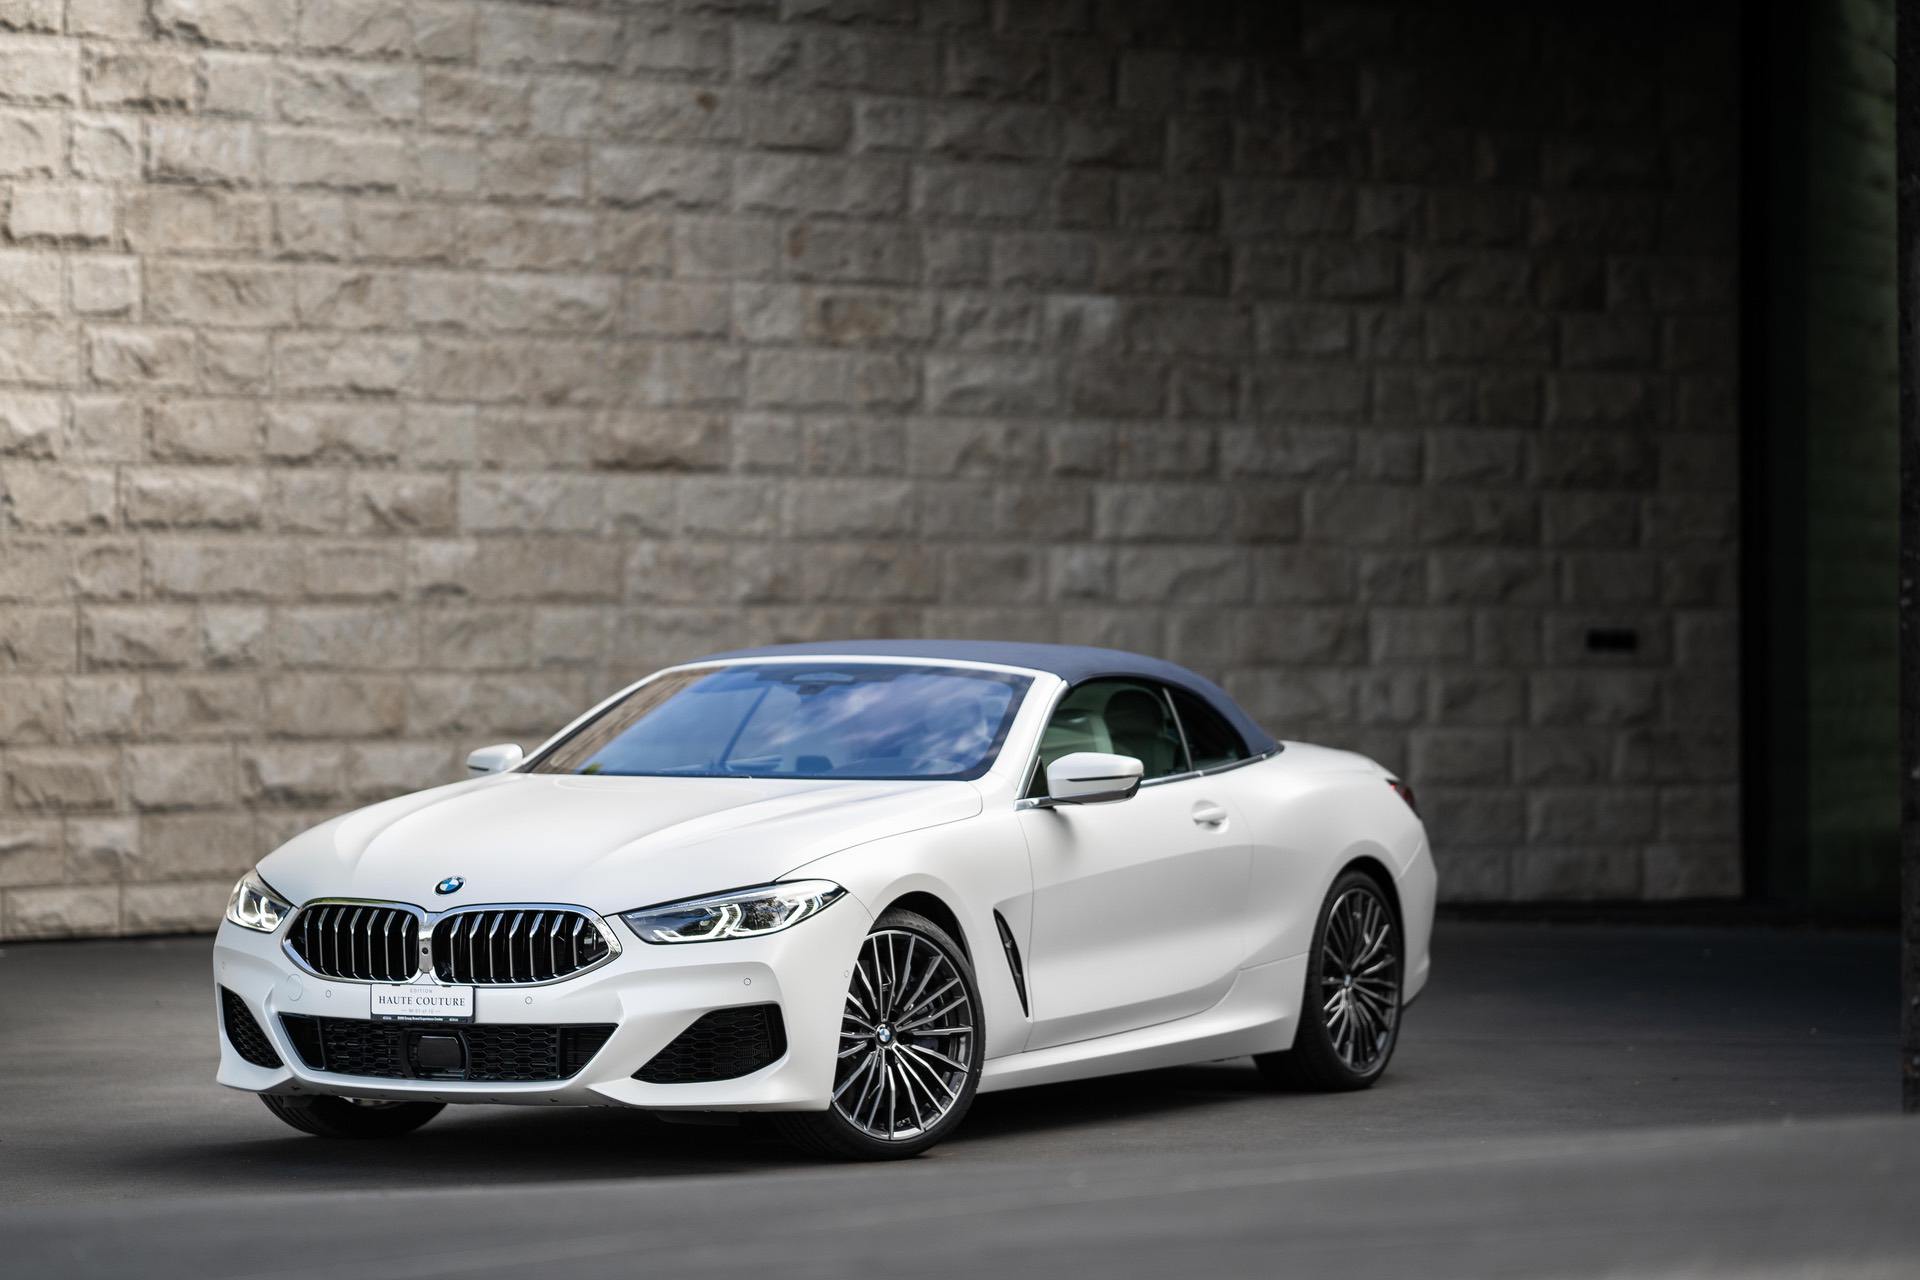 2021 BMW 8 Series Haute Couture Edition now available